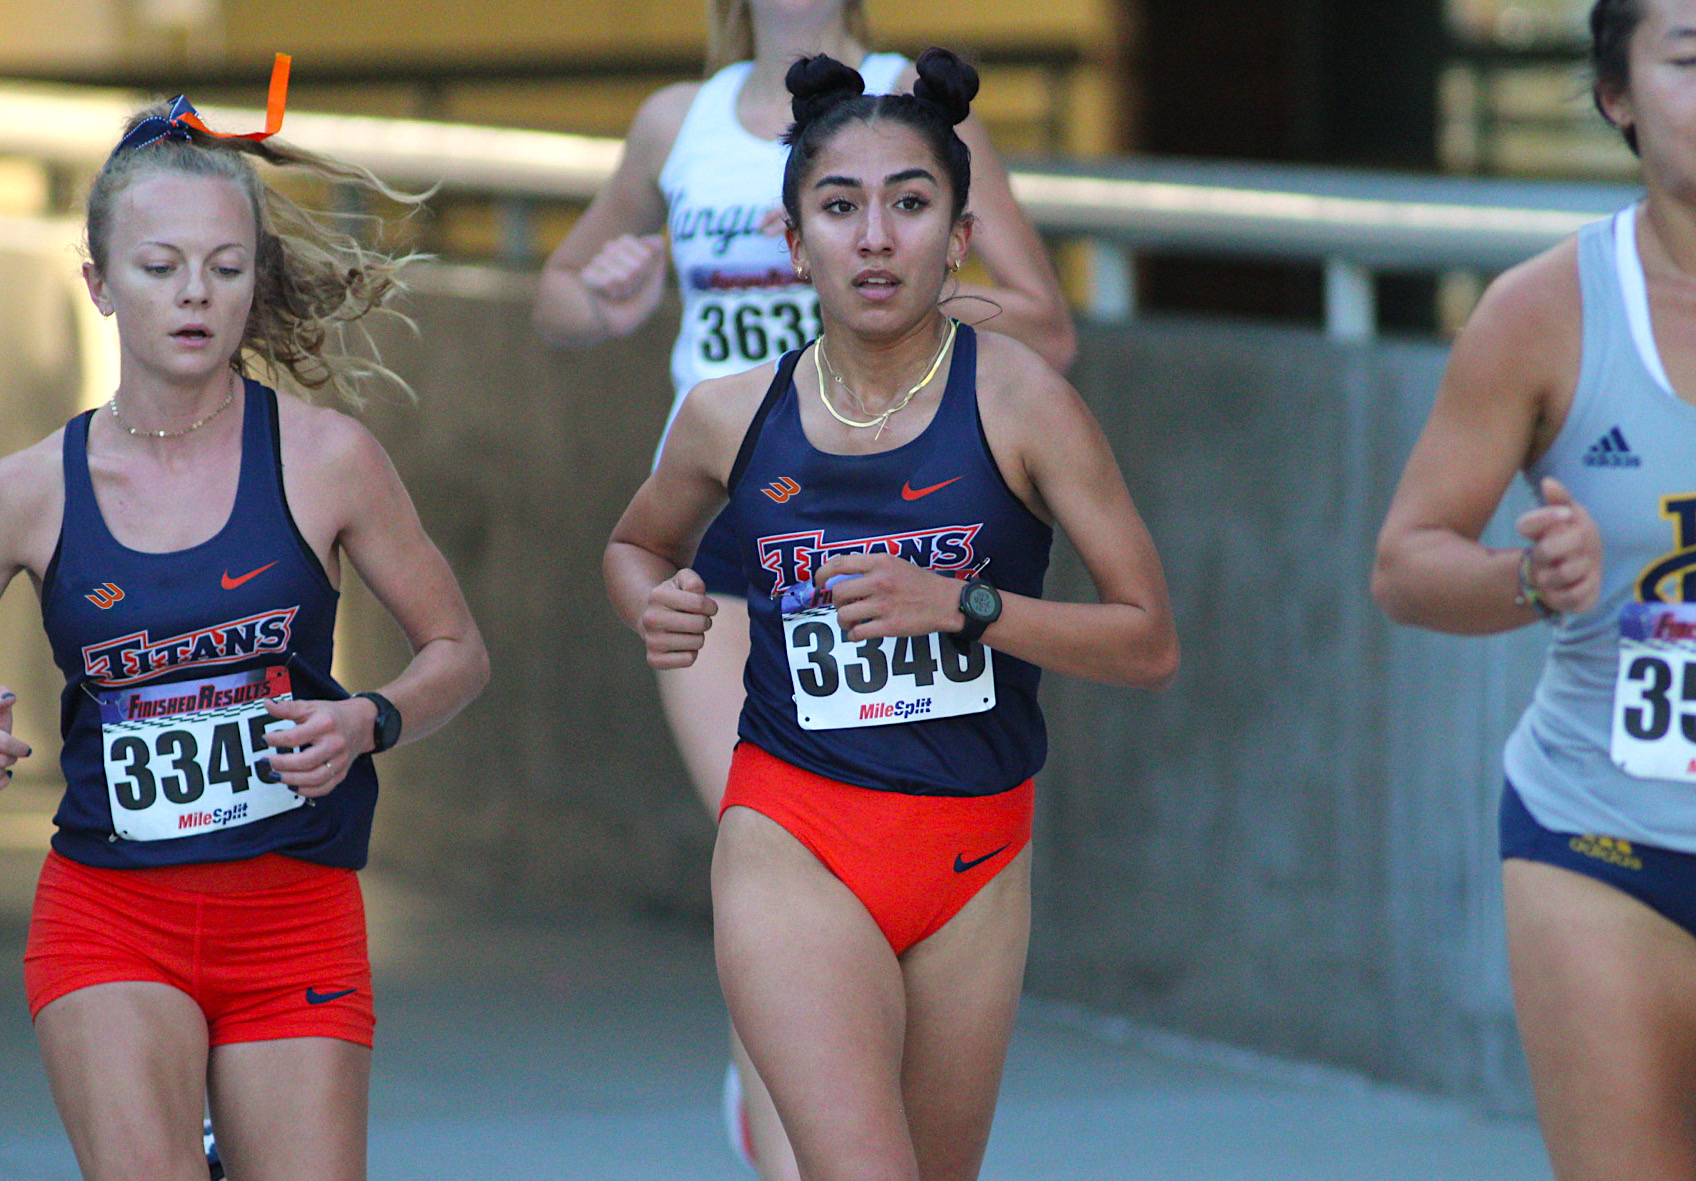 Emily Olson and Olivia Ruiz running side by side